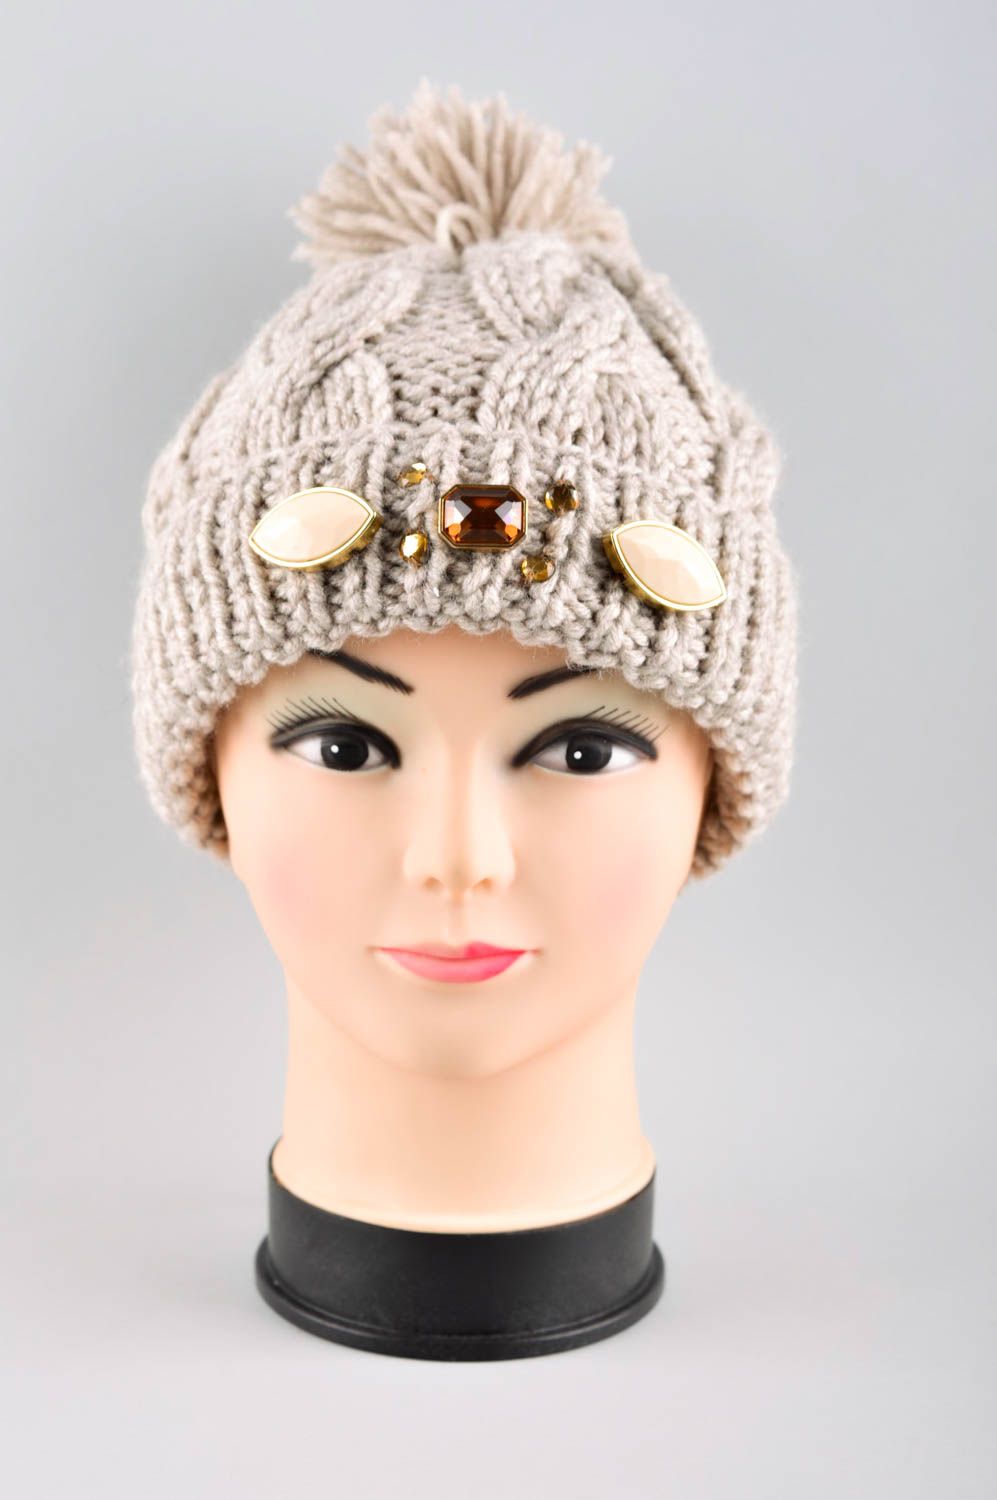 Handmade cute winter cap knitted warm accessories stylish hat for women photo 2